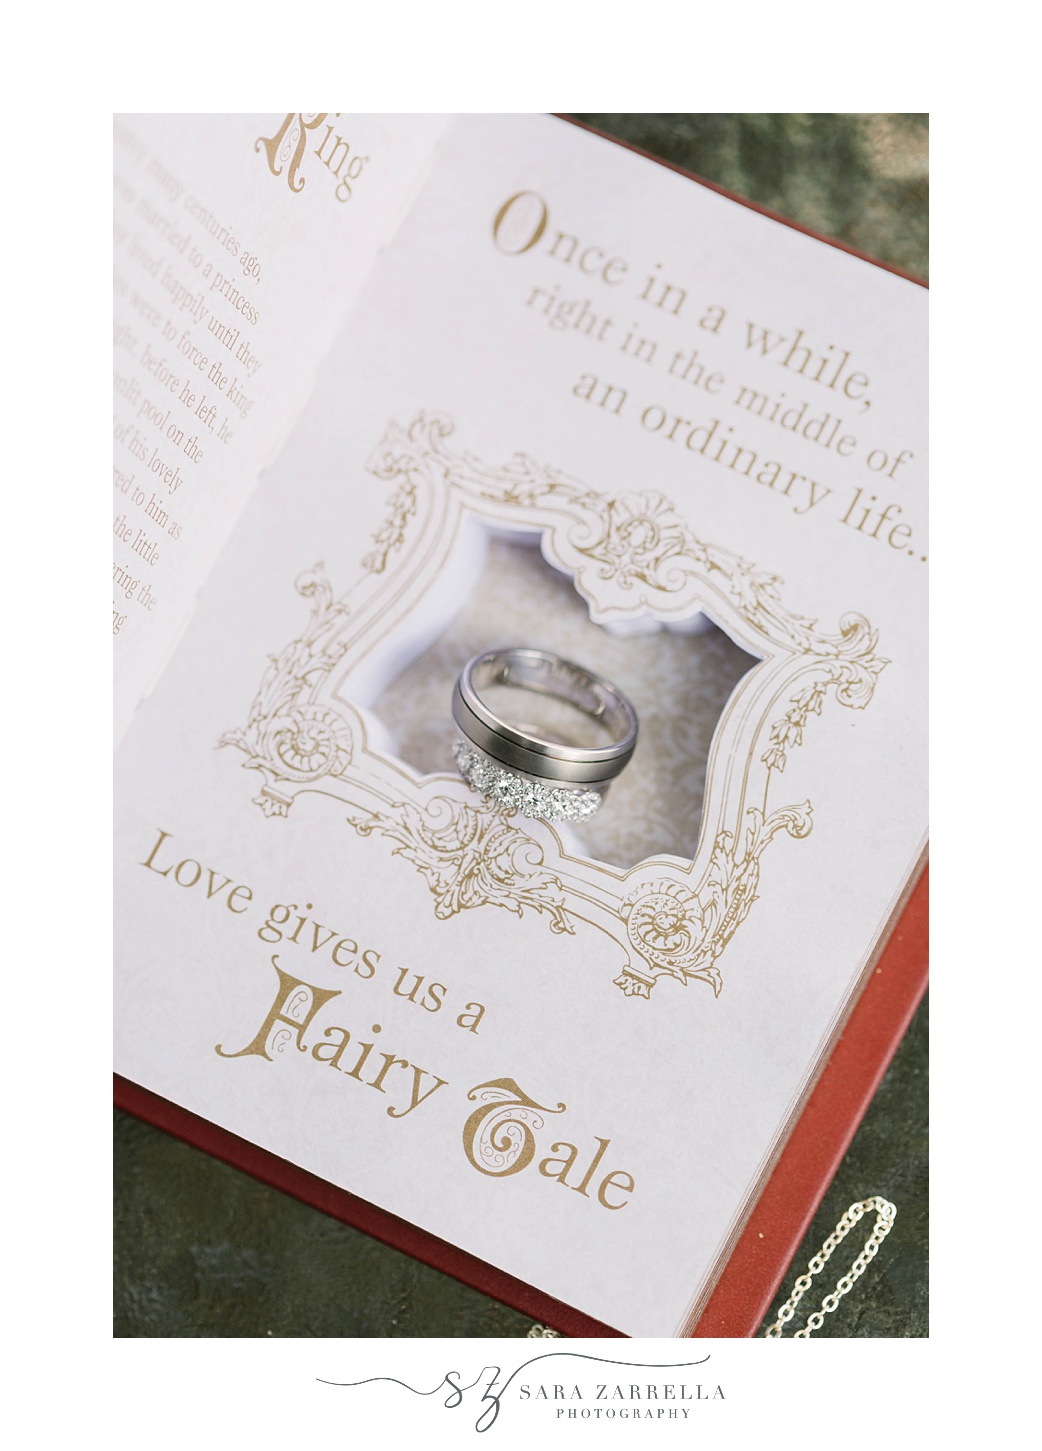 wedding ring rests in fairytale book